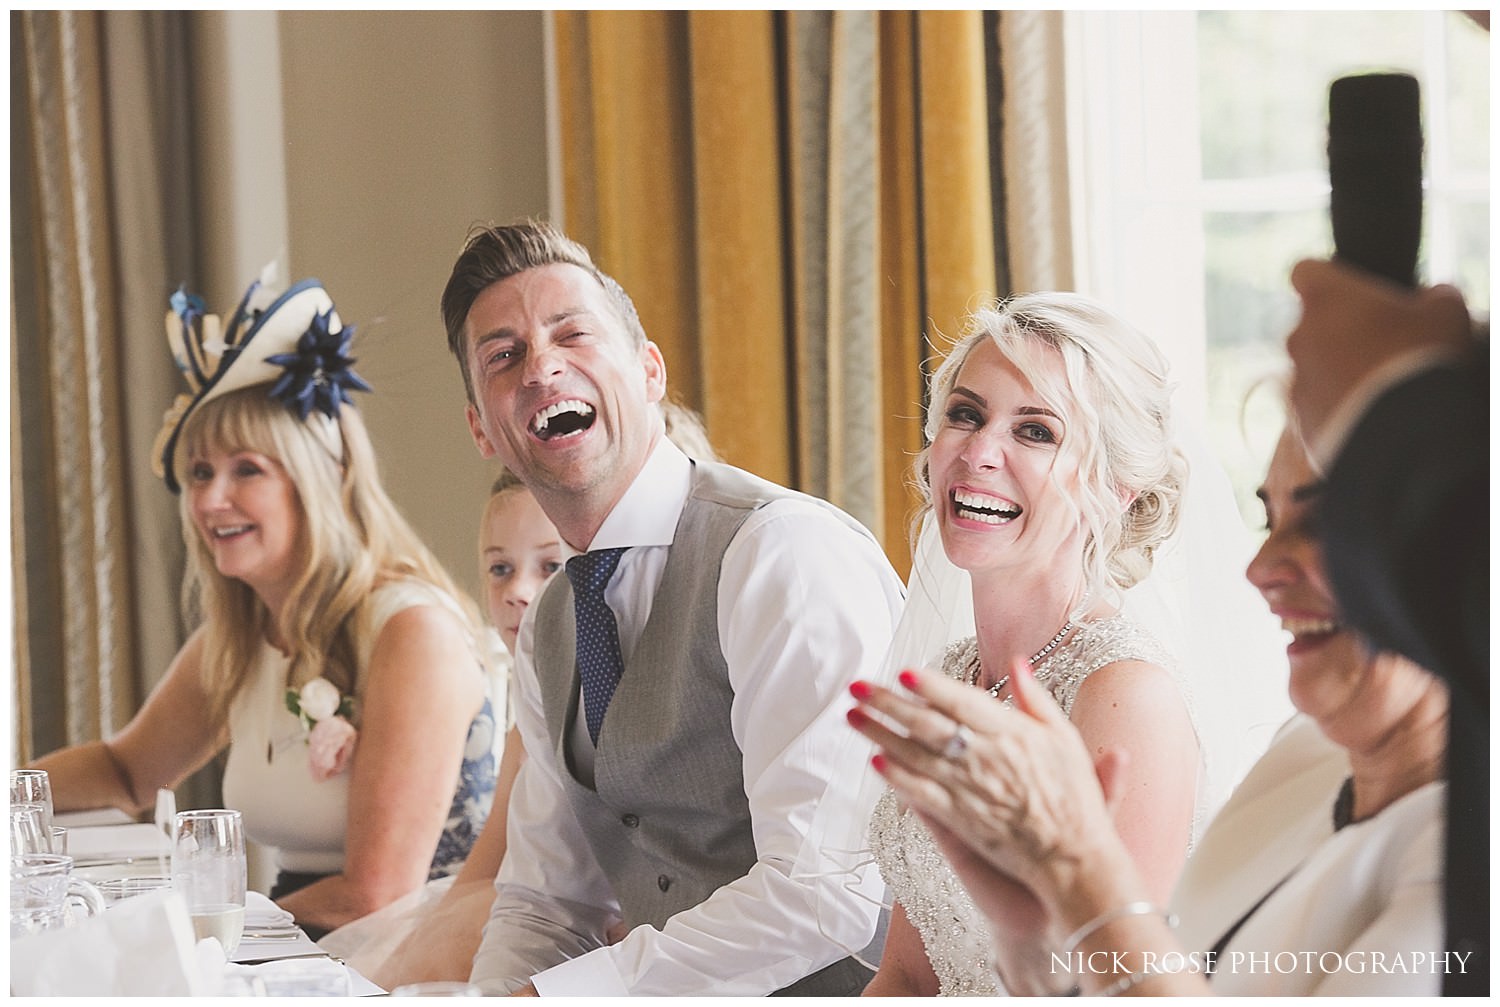  Groom and his bride laughing during the wedding speeches at the Rudding Park Hotel 